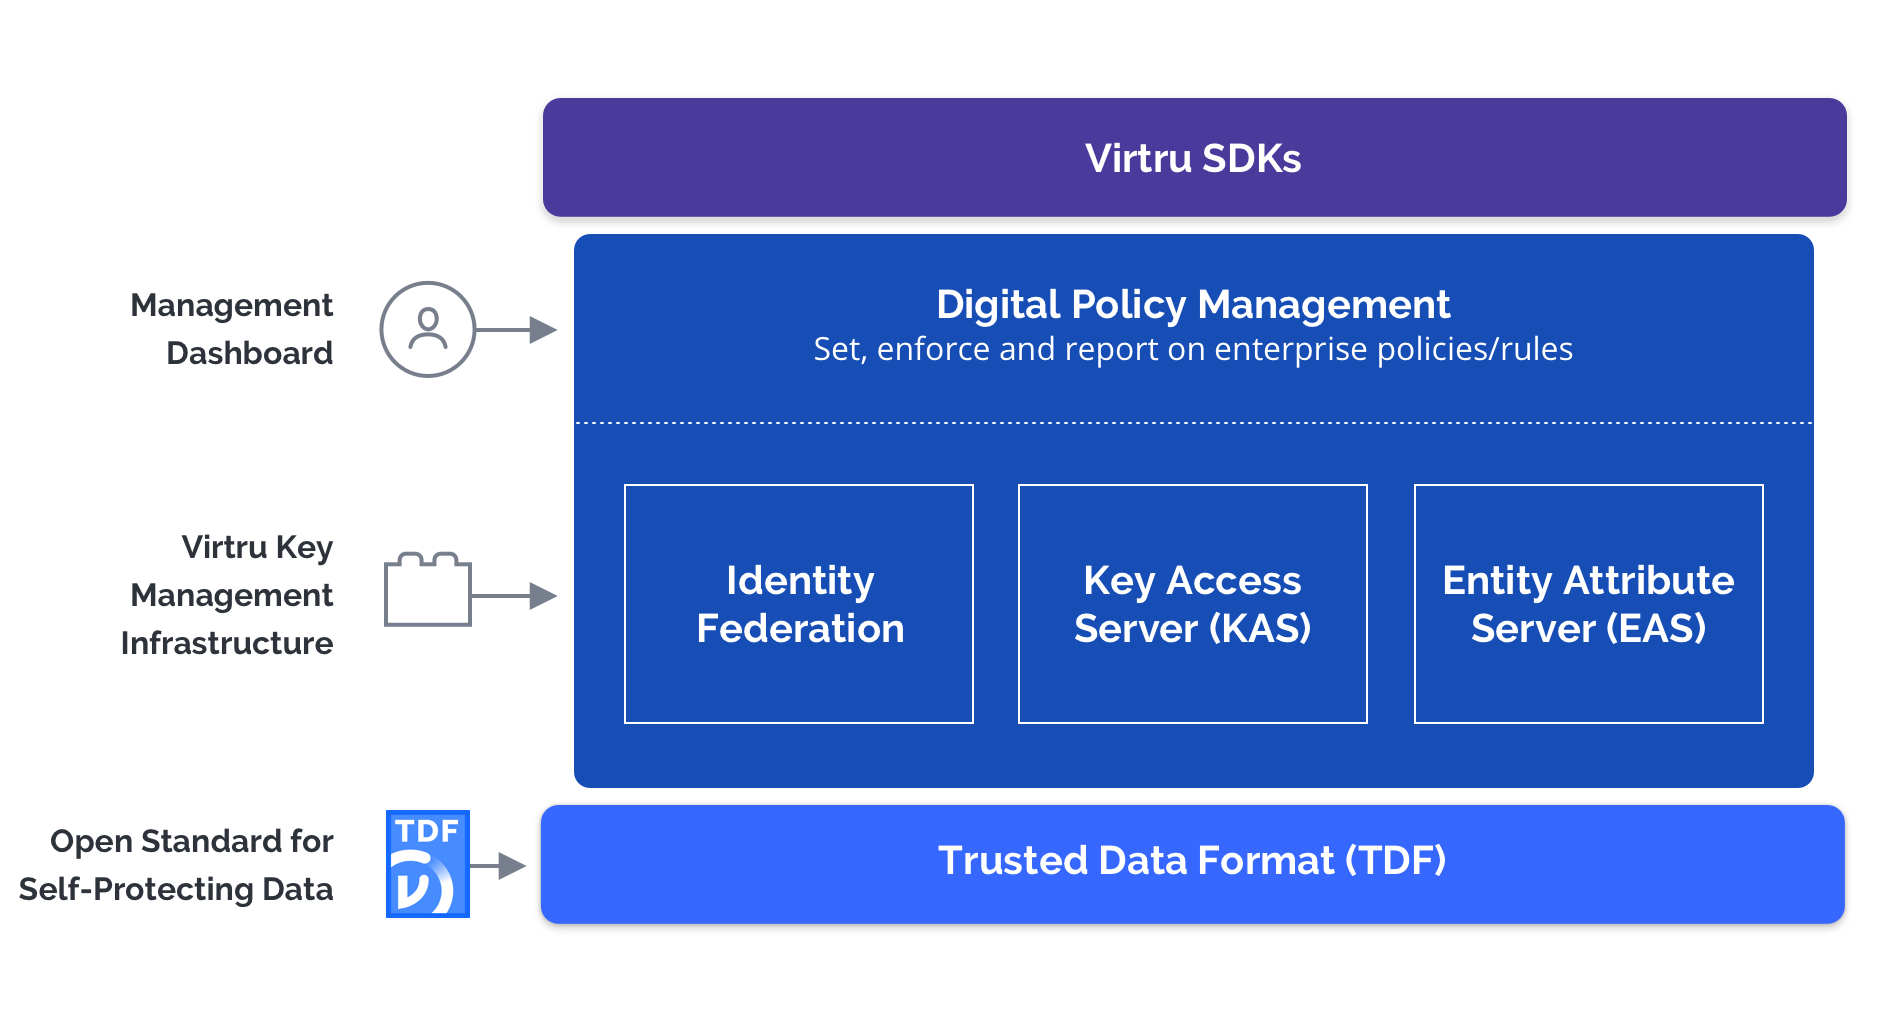 Virtru SDKs provide an application interface on top of our Digital Policy Management framework, which allows a service to set, enforce and report on enterprise policies and rules. The Management Dashboard is the front end to that service. This builds on top of three key blocks: Identity Federation, Key Access Server (KAS), and the Entity Attribute Server (EAS), which are building blocks of the Virtru Key Management Infrastructure. These all build on the Trusted Data Format (TDF), an Open Standard for Self-Protecting Data.